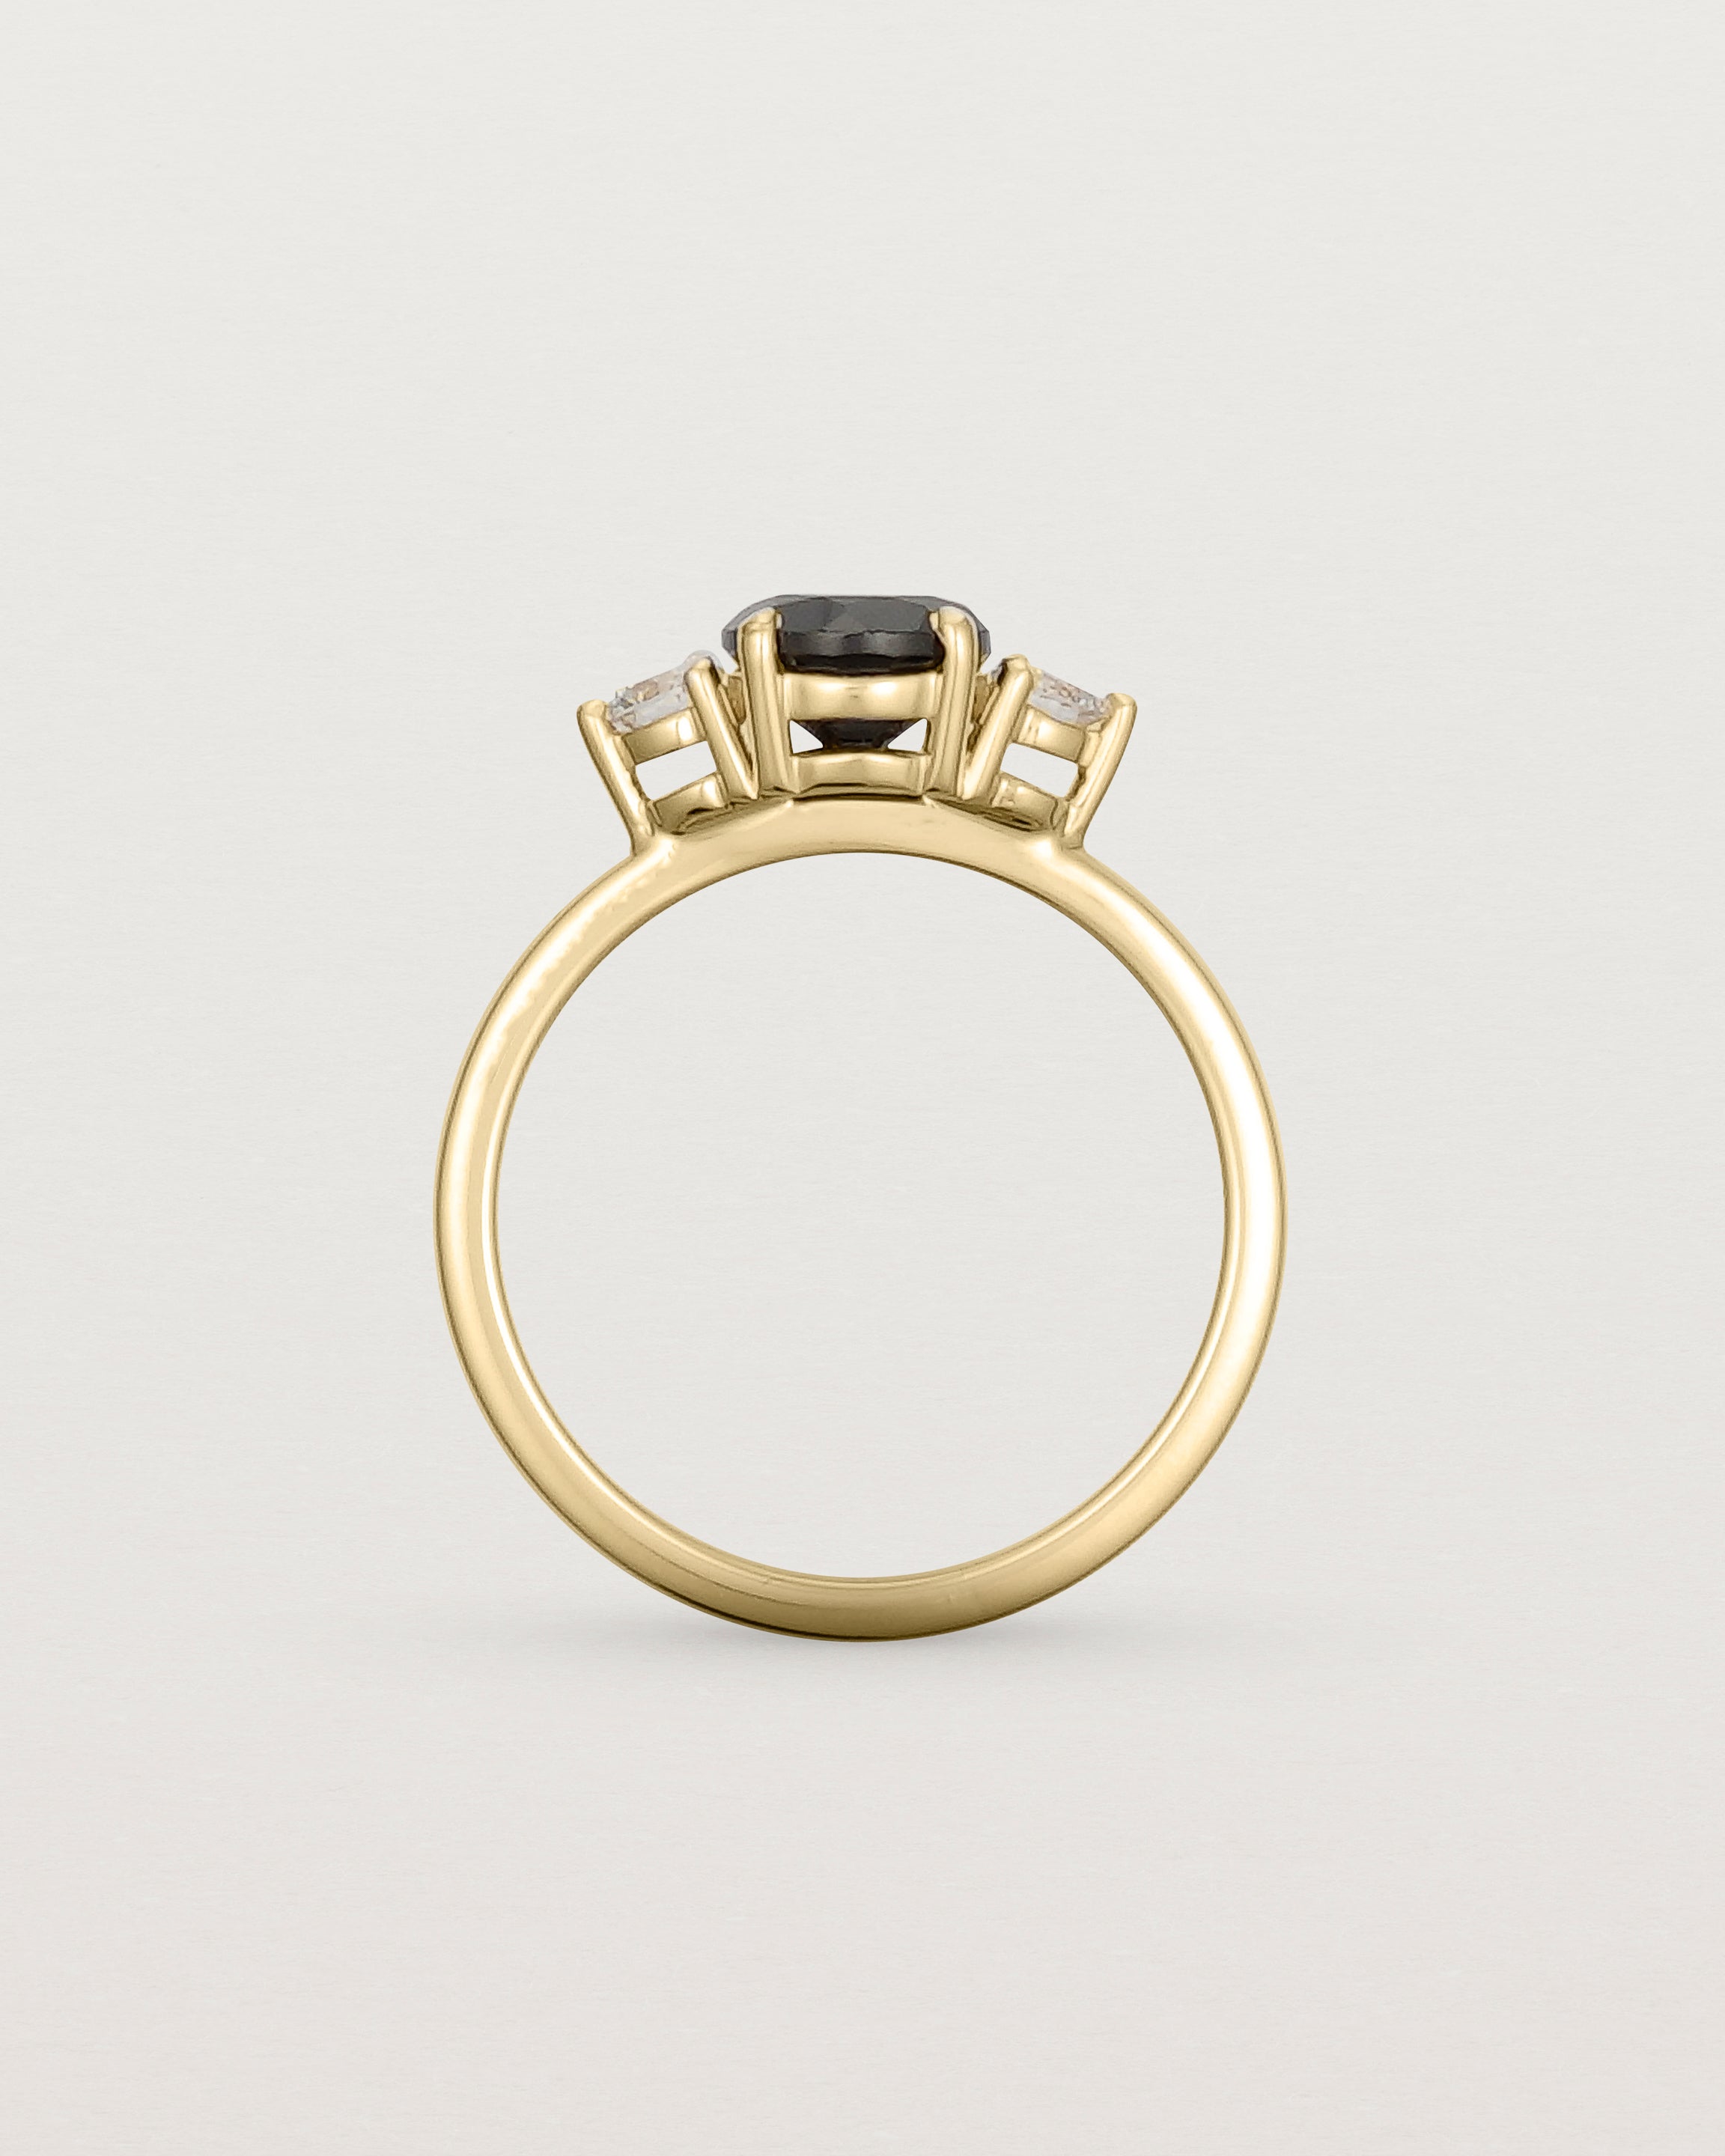 Standing view of the Petite Una Round Trio Ring | Black Spinel & Diamonds | Yellow Gold.